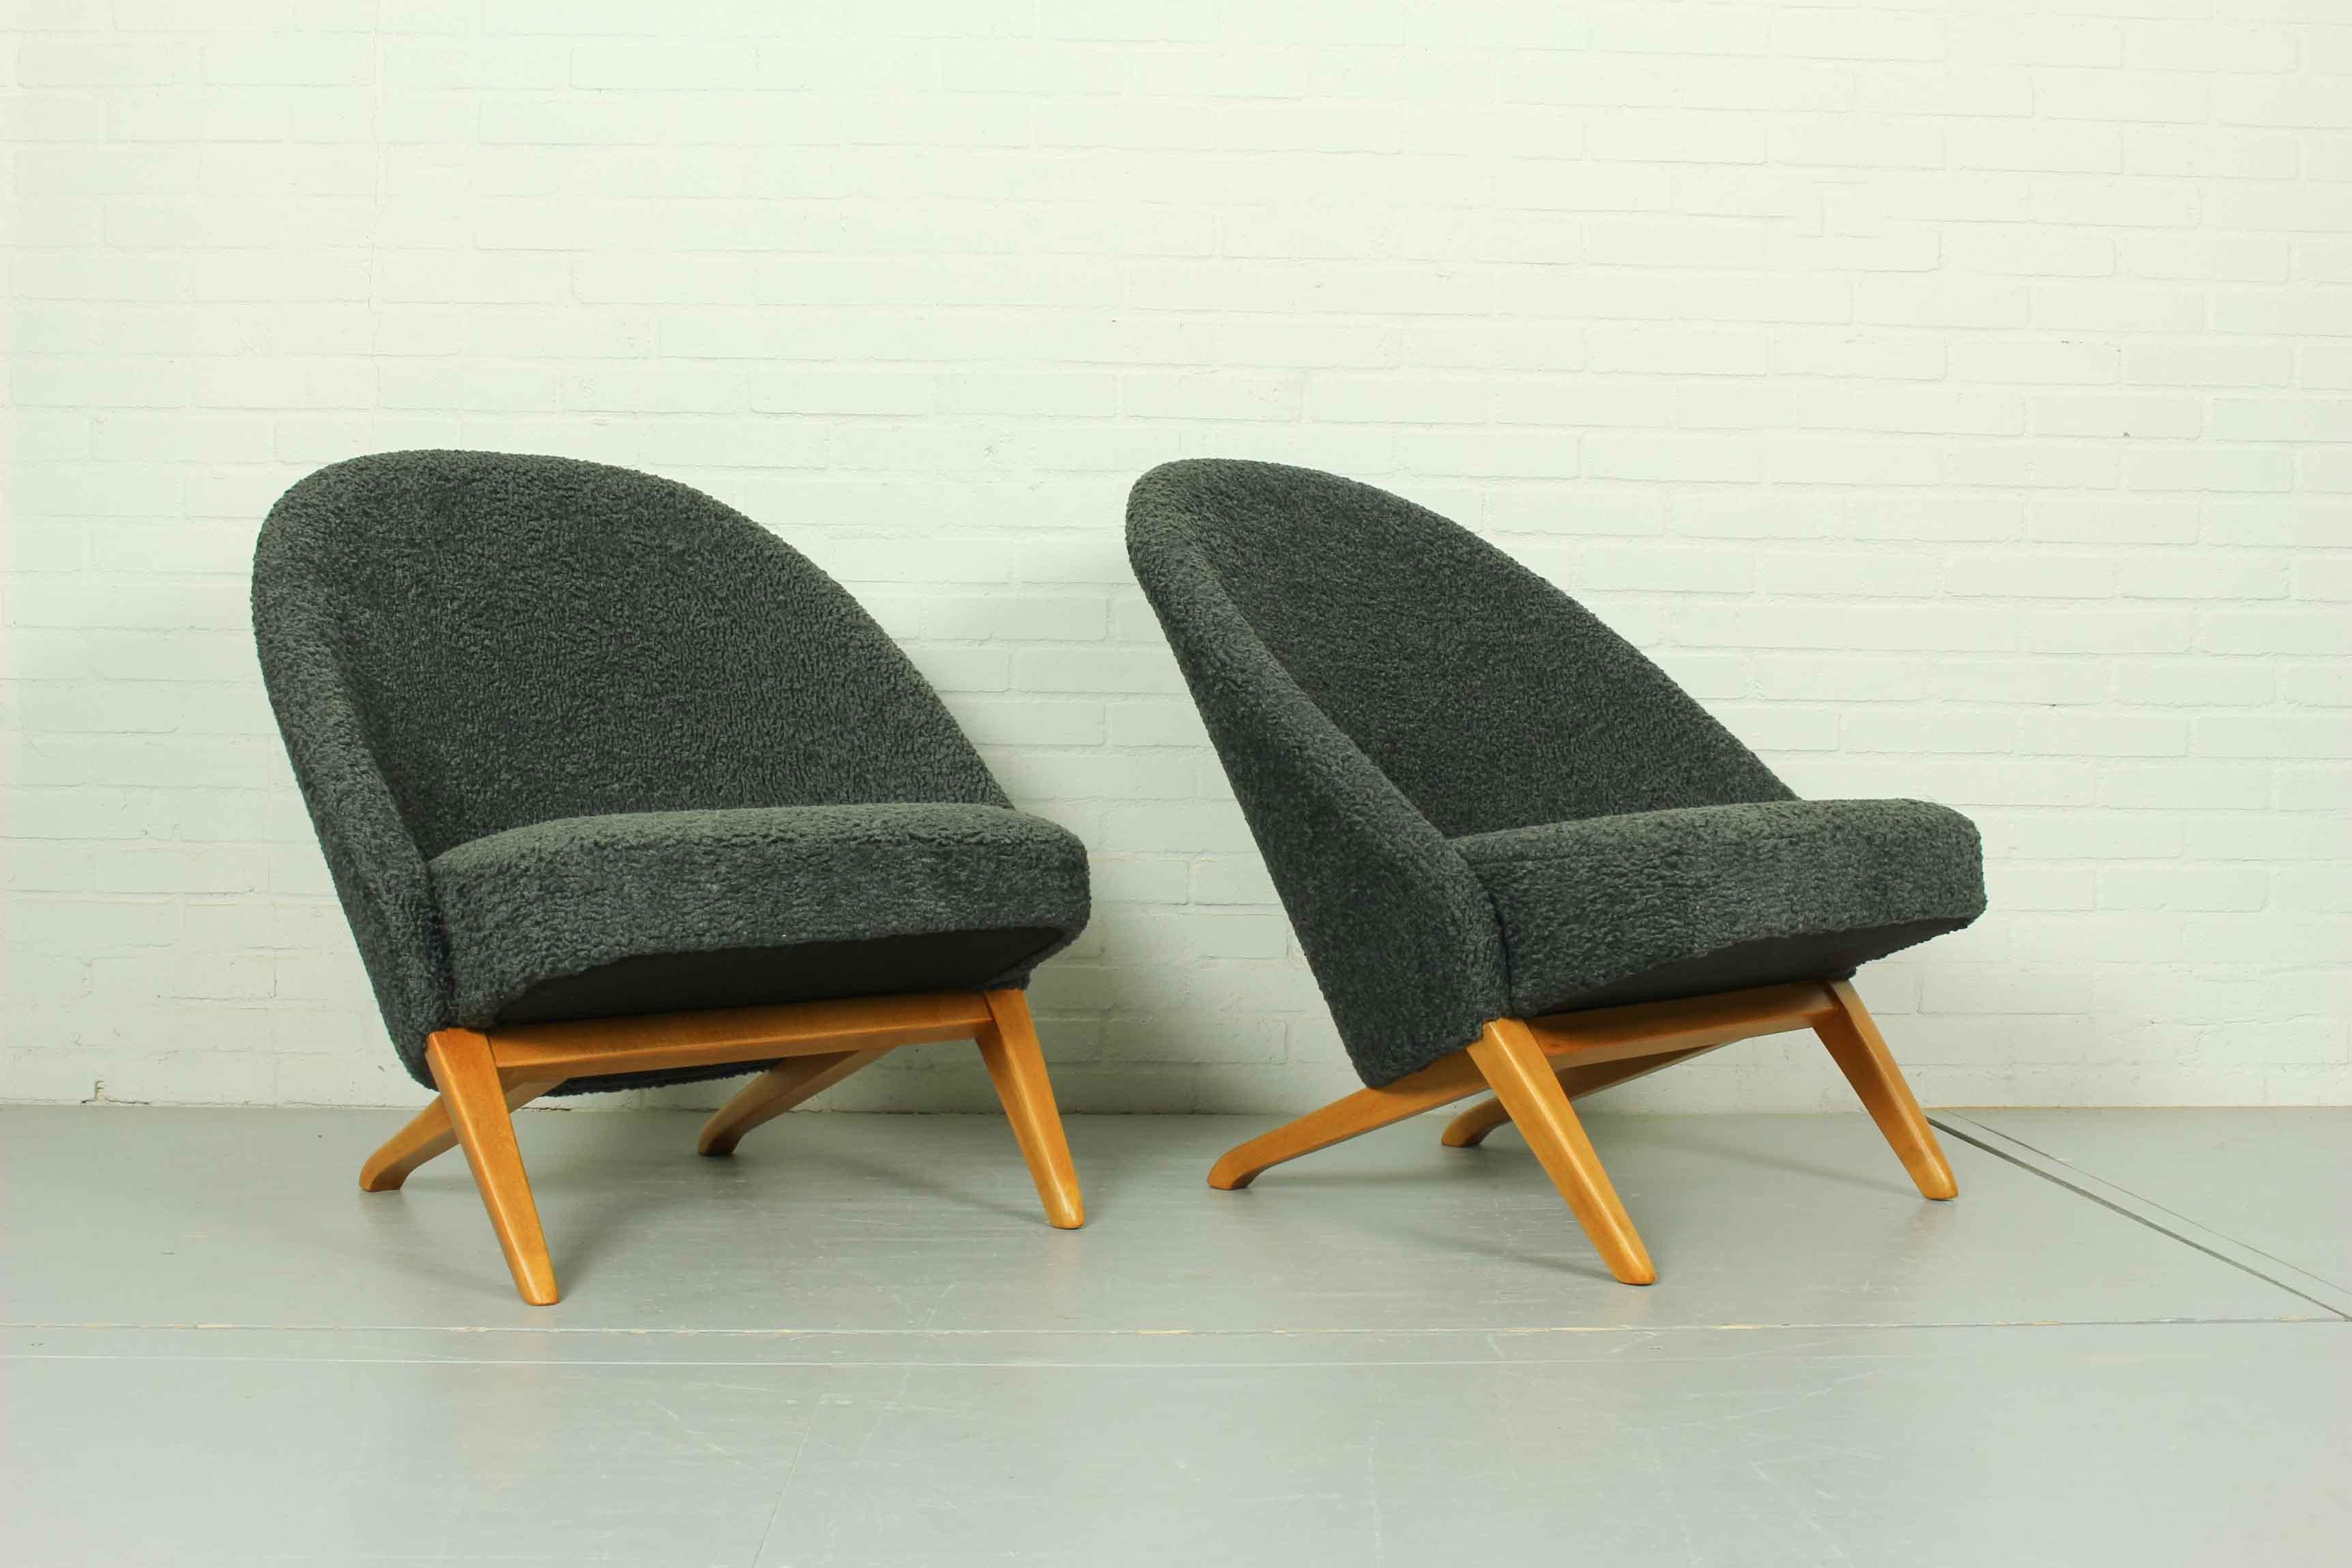 Set of 2 'Congo' lounge chairs by Theo Ruth for Artifort, newly upholstered with Kravet Faux Sheepskin upholstery fabric. These Congo chairs are designed by Theo Ruth and produced by Artifort, The Netherlands, 1950s. The back and the seat are